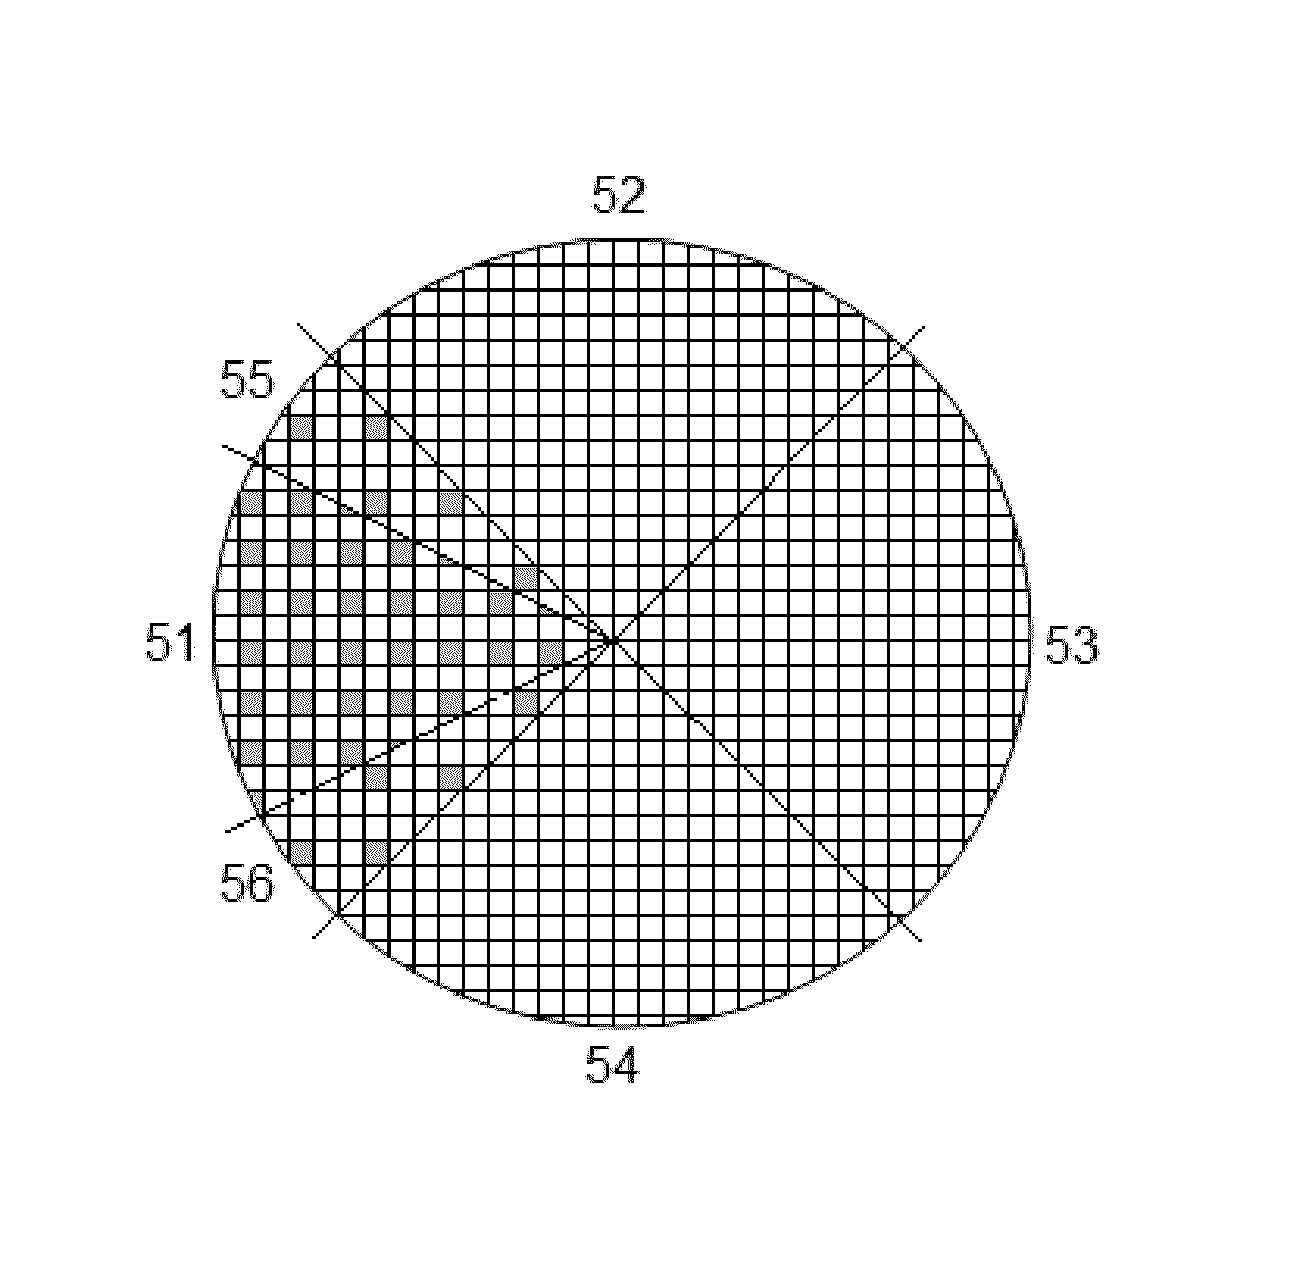 Shower plate having different aperture dimensions and/or distributions